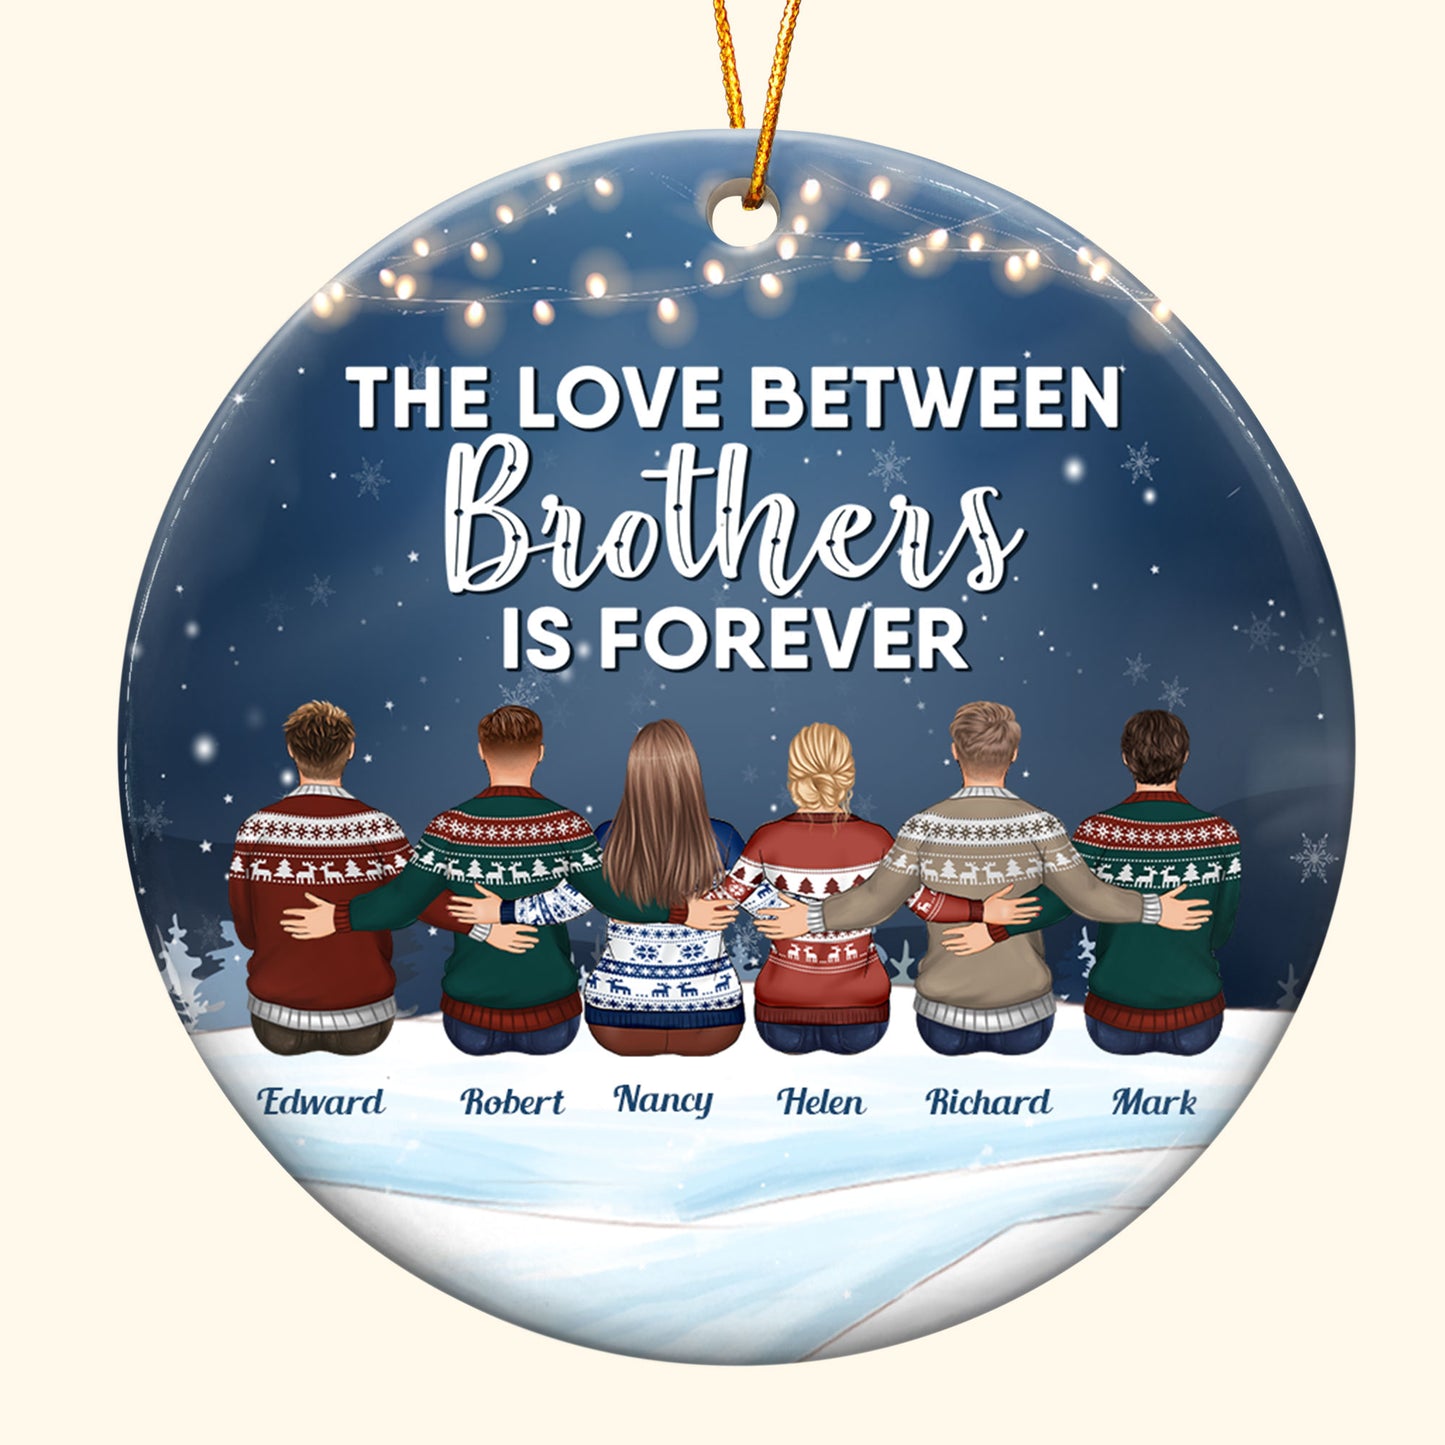 The Love Between Brothers & Sisters Is Forever - Personalized Ceramic Ornament - Family Hugging